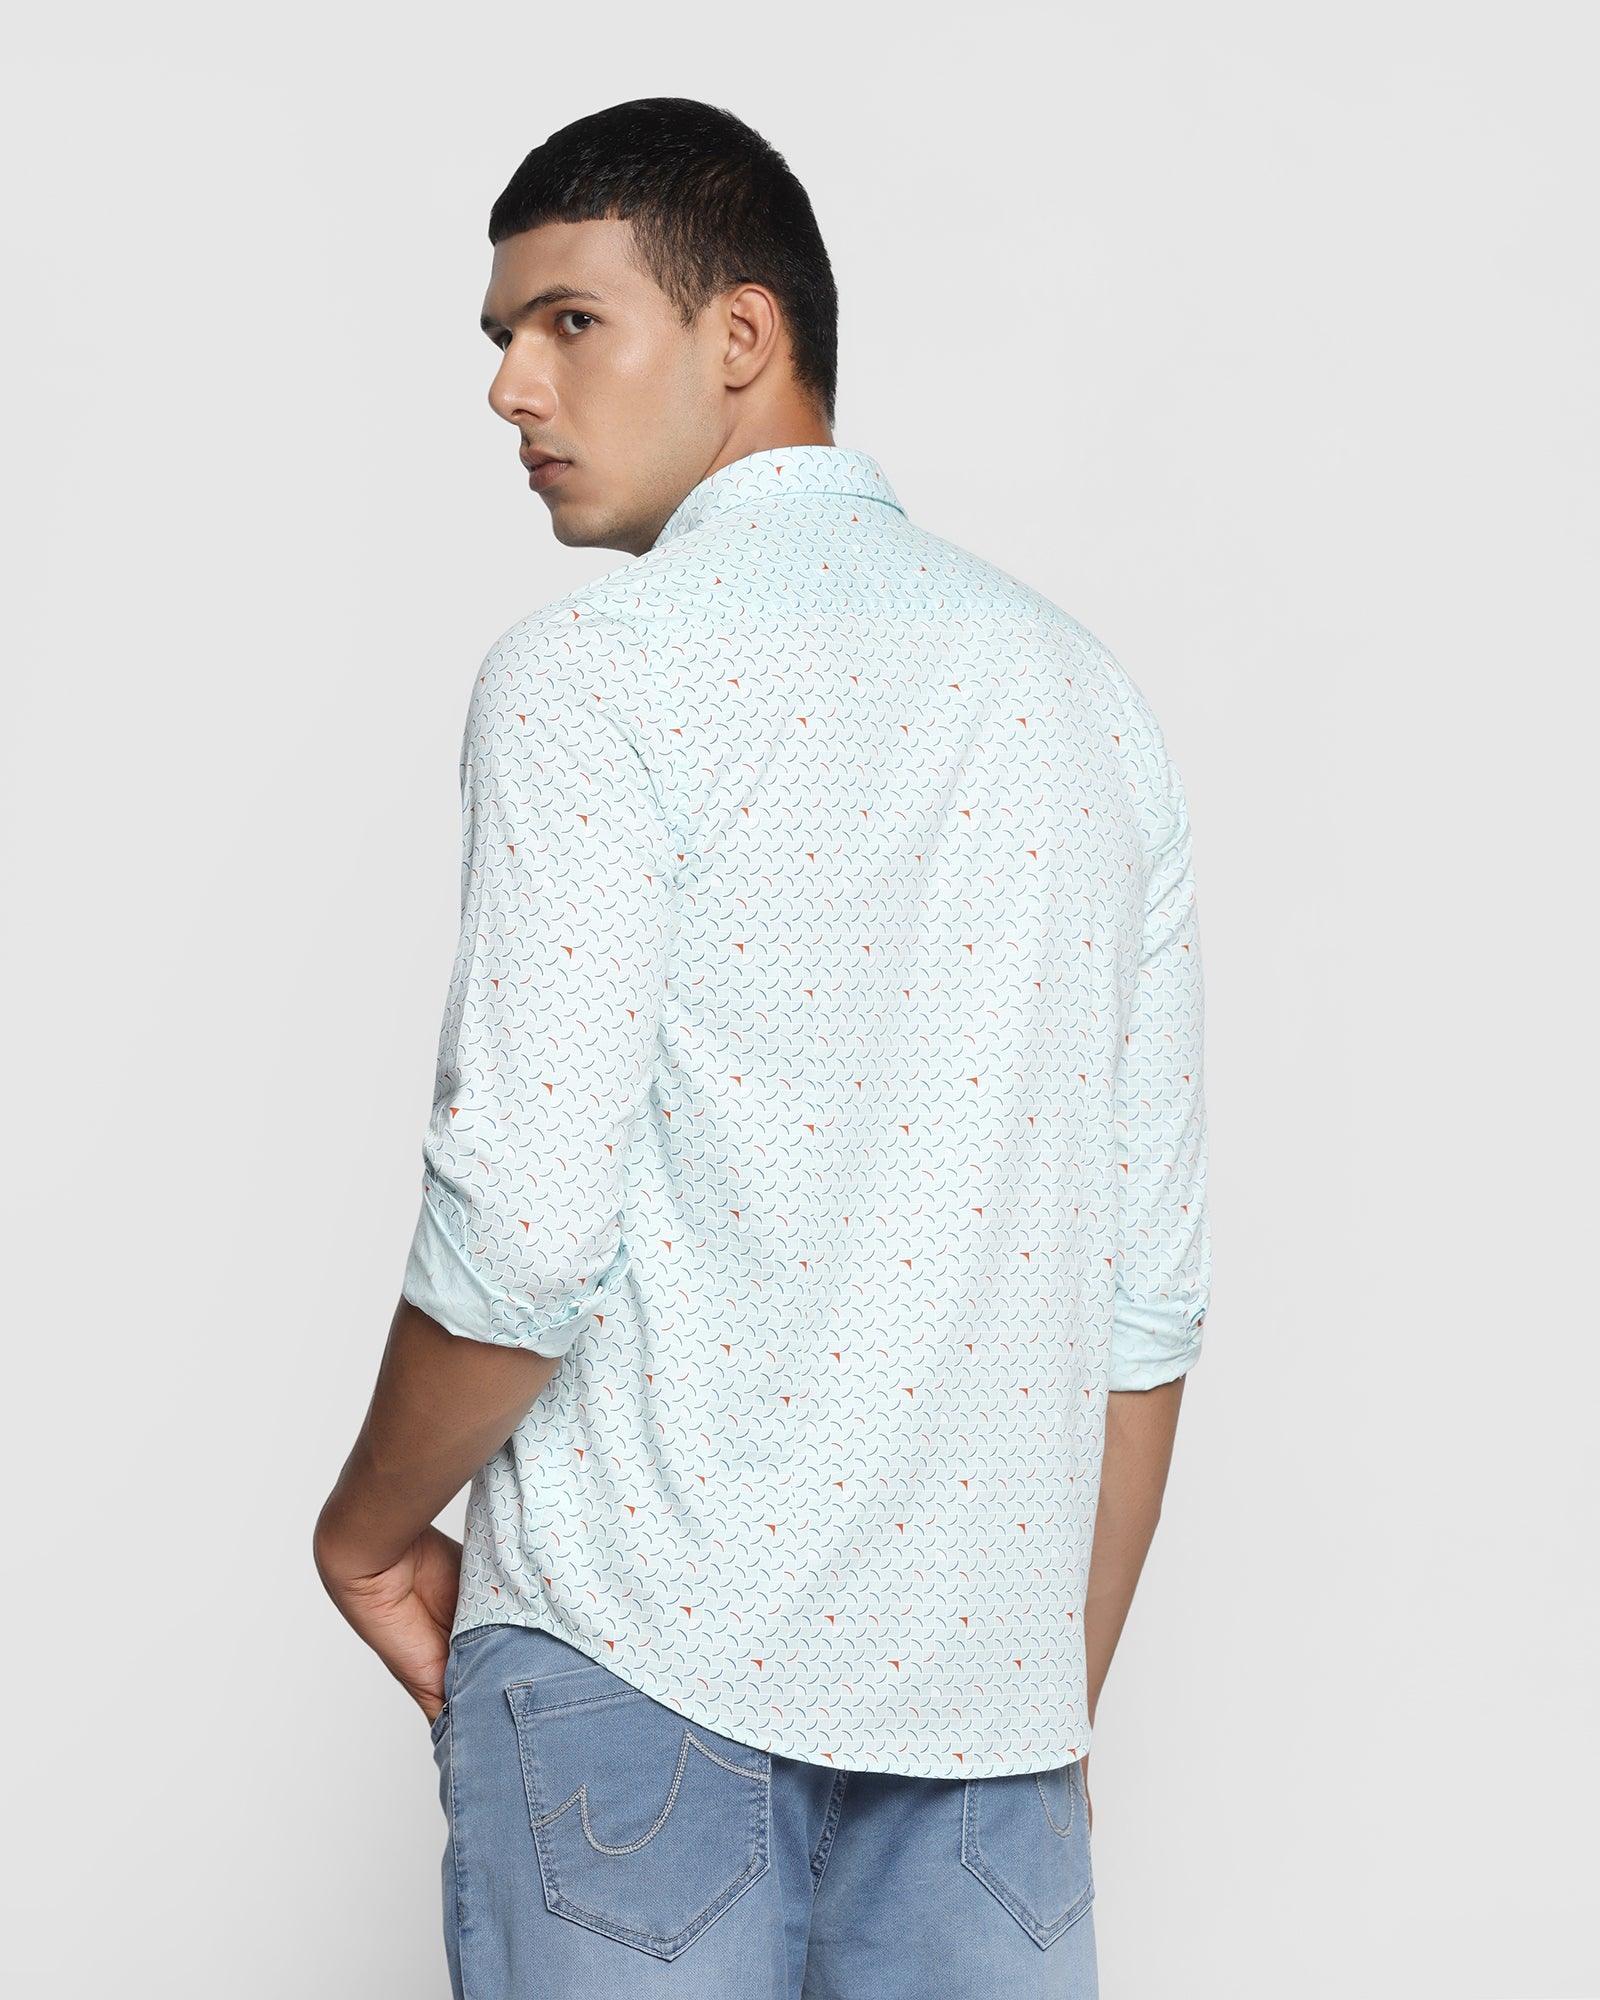 Casual Mint Printed Shirt - Frisco